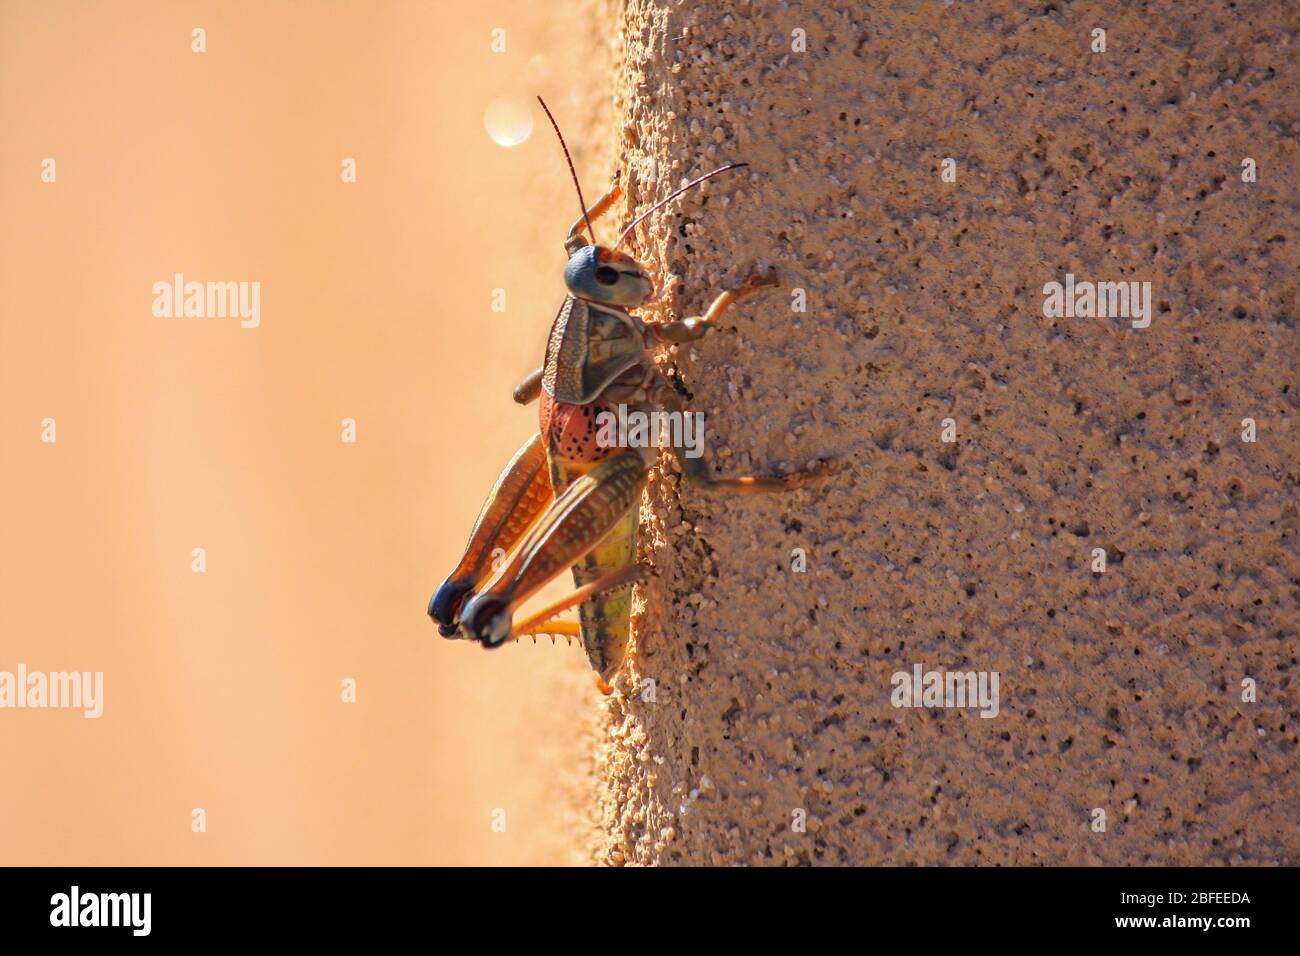 Locust grasshopper of family 'Acrididae', solitary short-horned insect that can form swarms. Side view of antenna anatomy detail Stock Photo